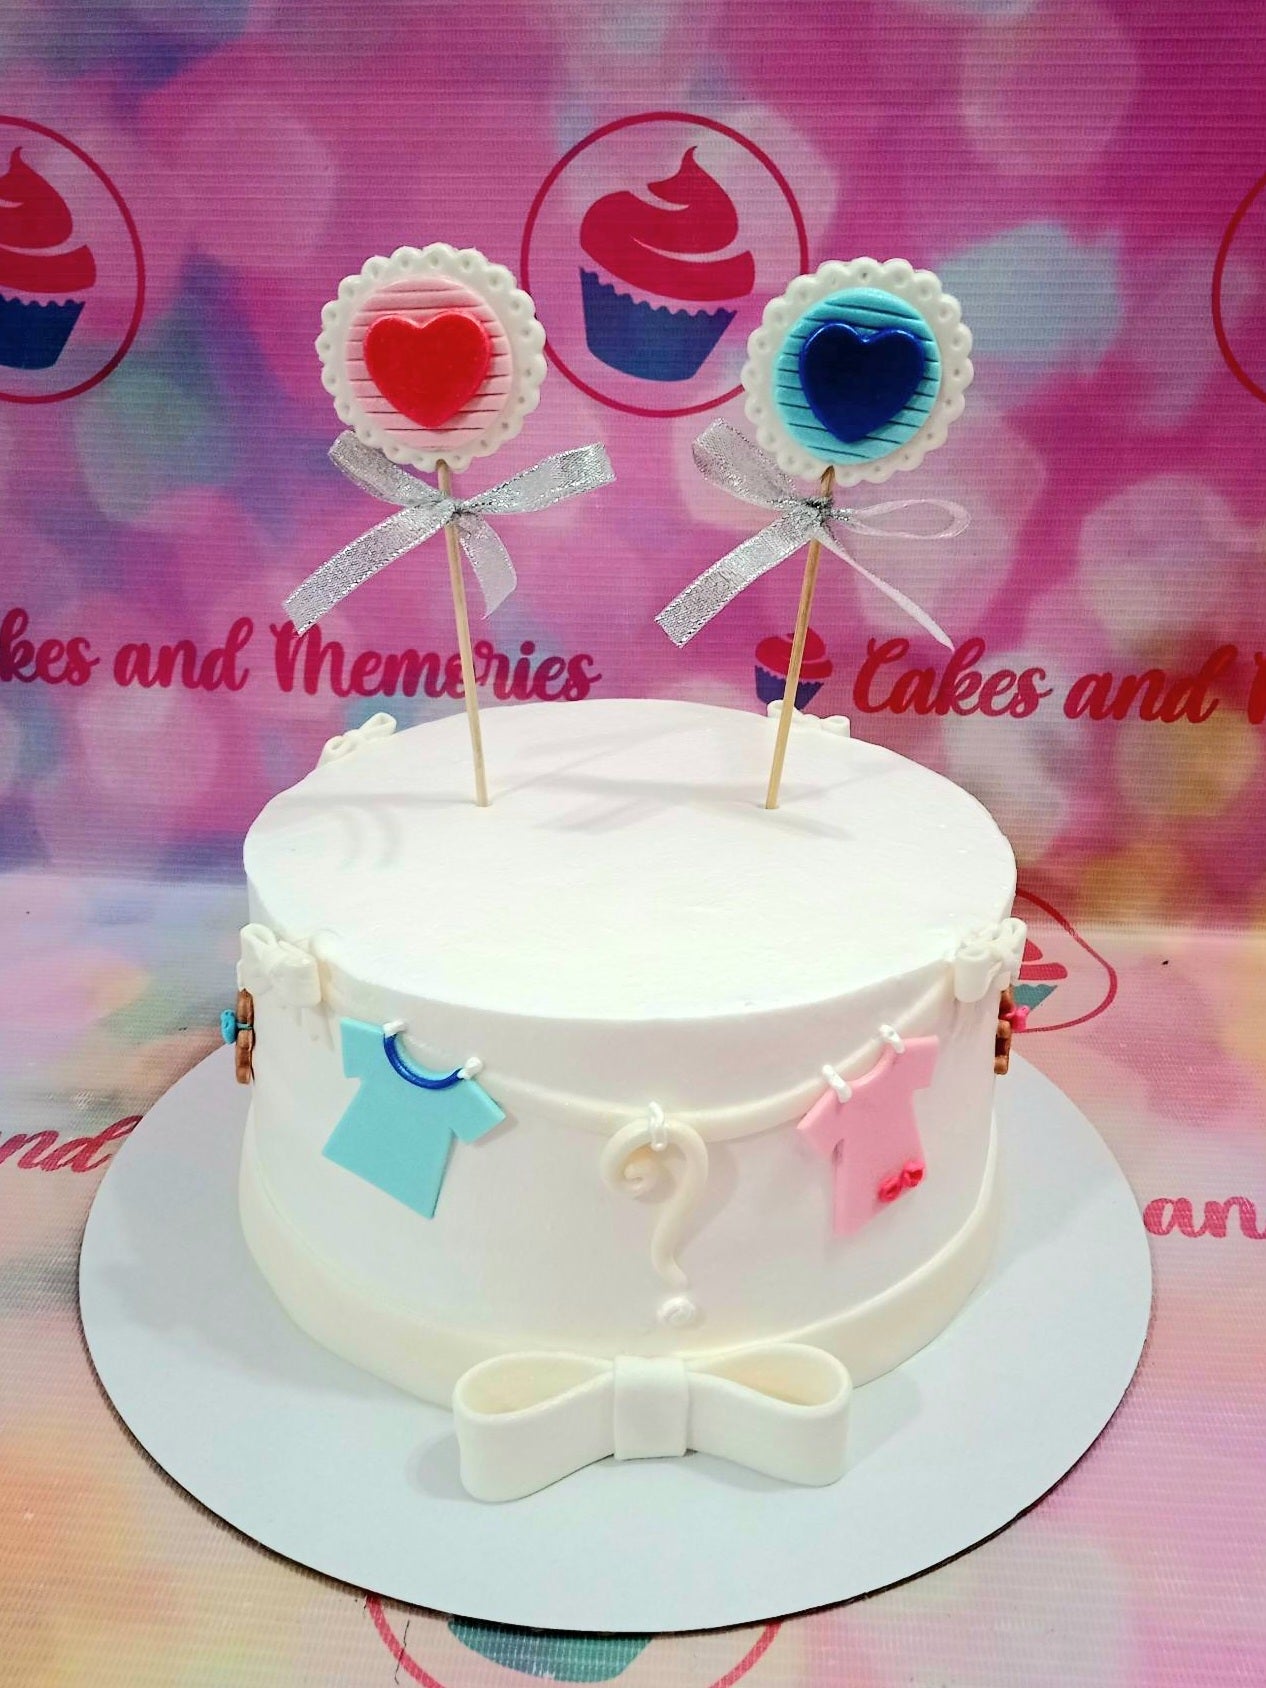 This custom decorated cake is perfect for gender reveal parties or baby showers. It features two cute baby shirts and lollipops in a blue and pink color scheme. It is sure to be a hit with your friends and family! Made with care using the highest quality ingredients, this cake will make a great addition to any gender reveal or pregnancy celebration.